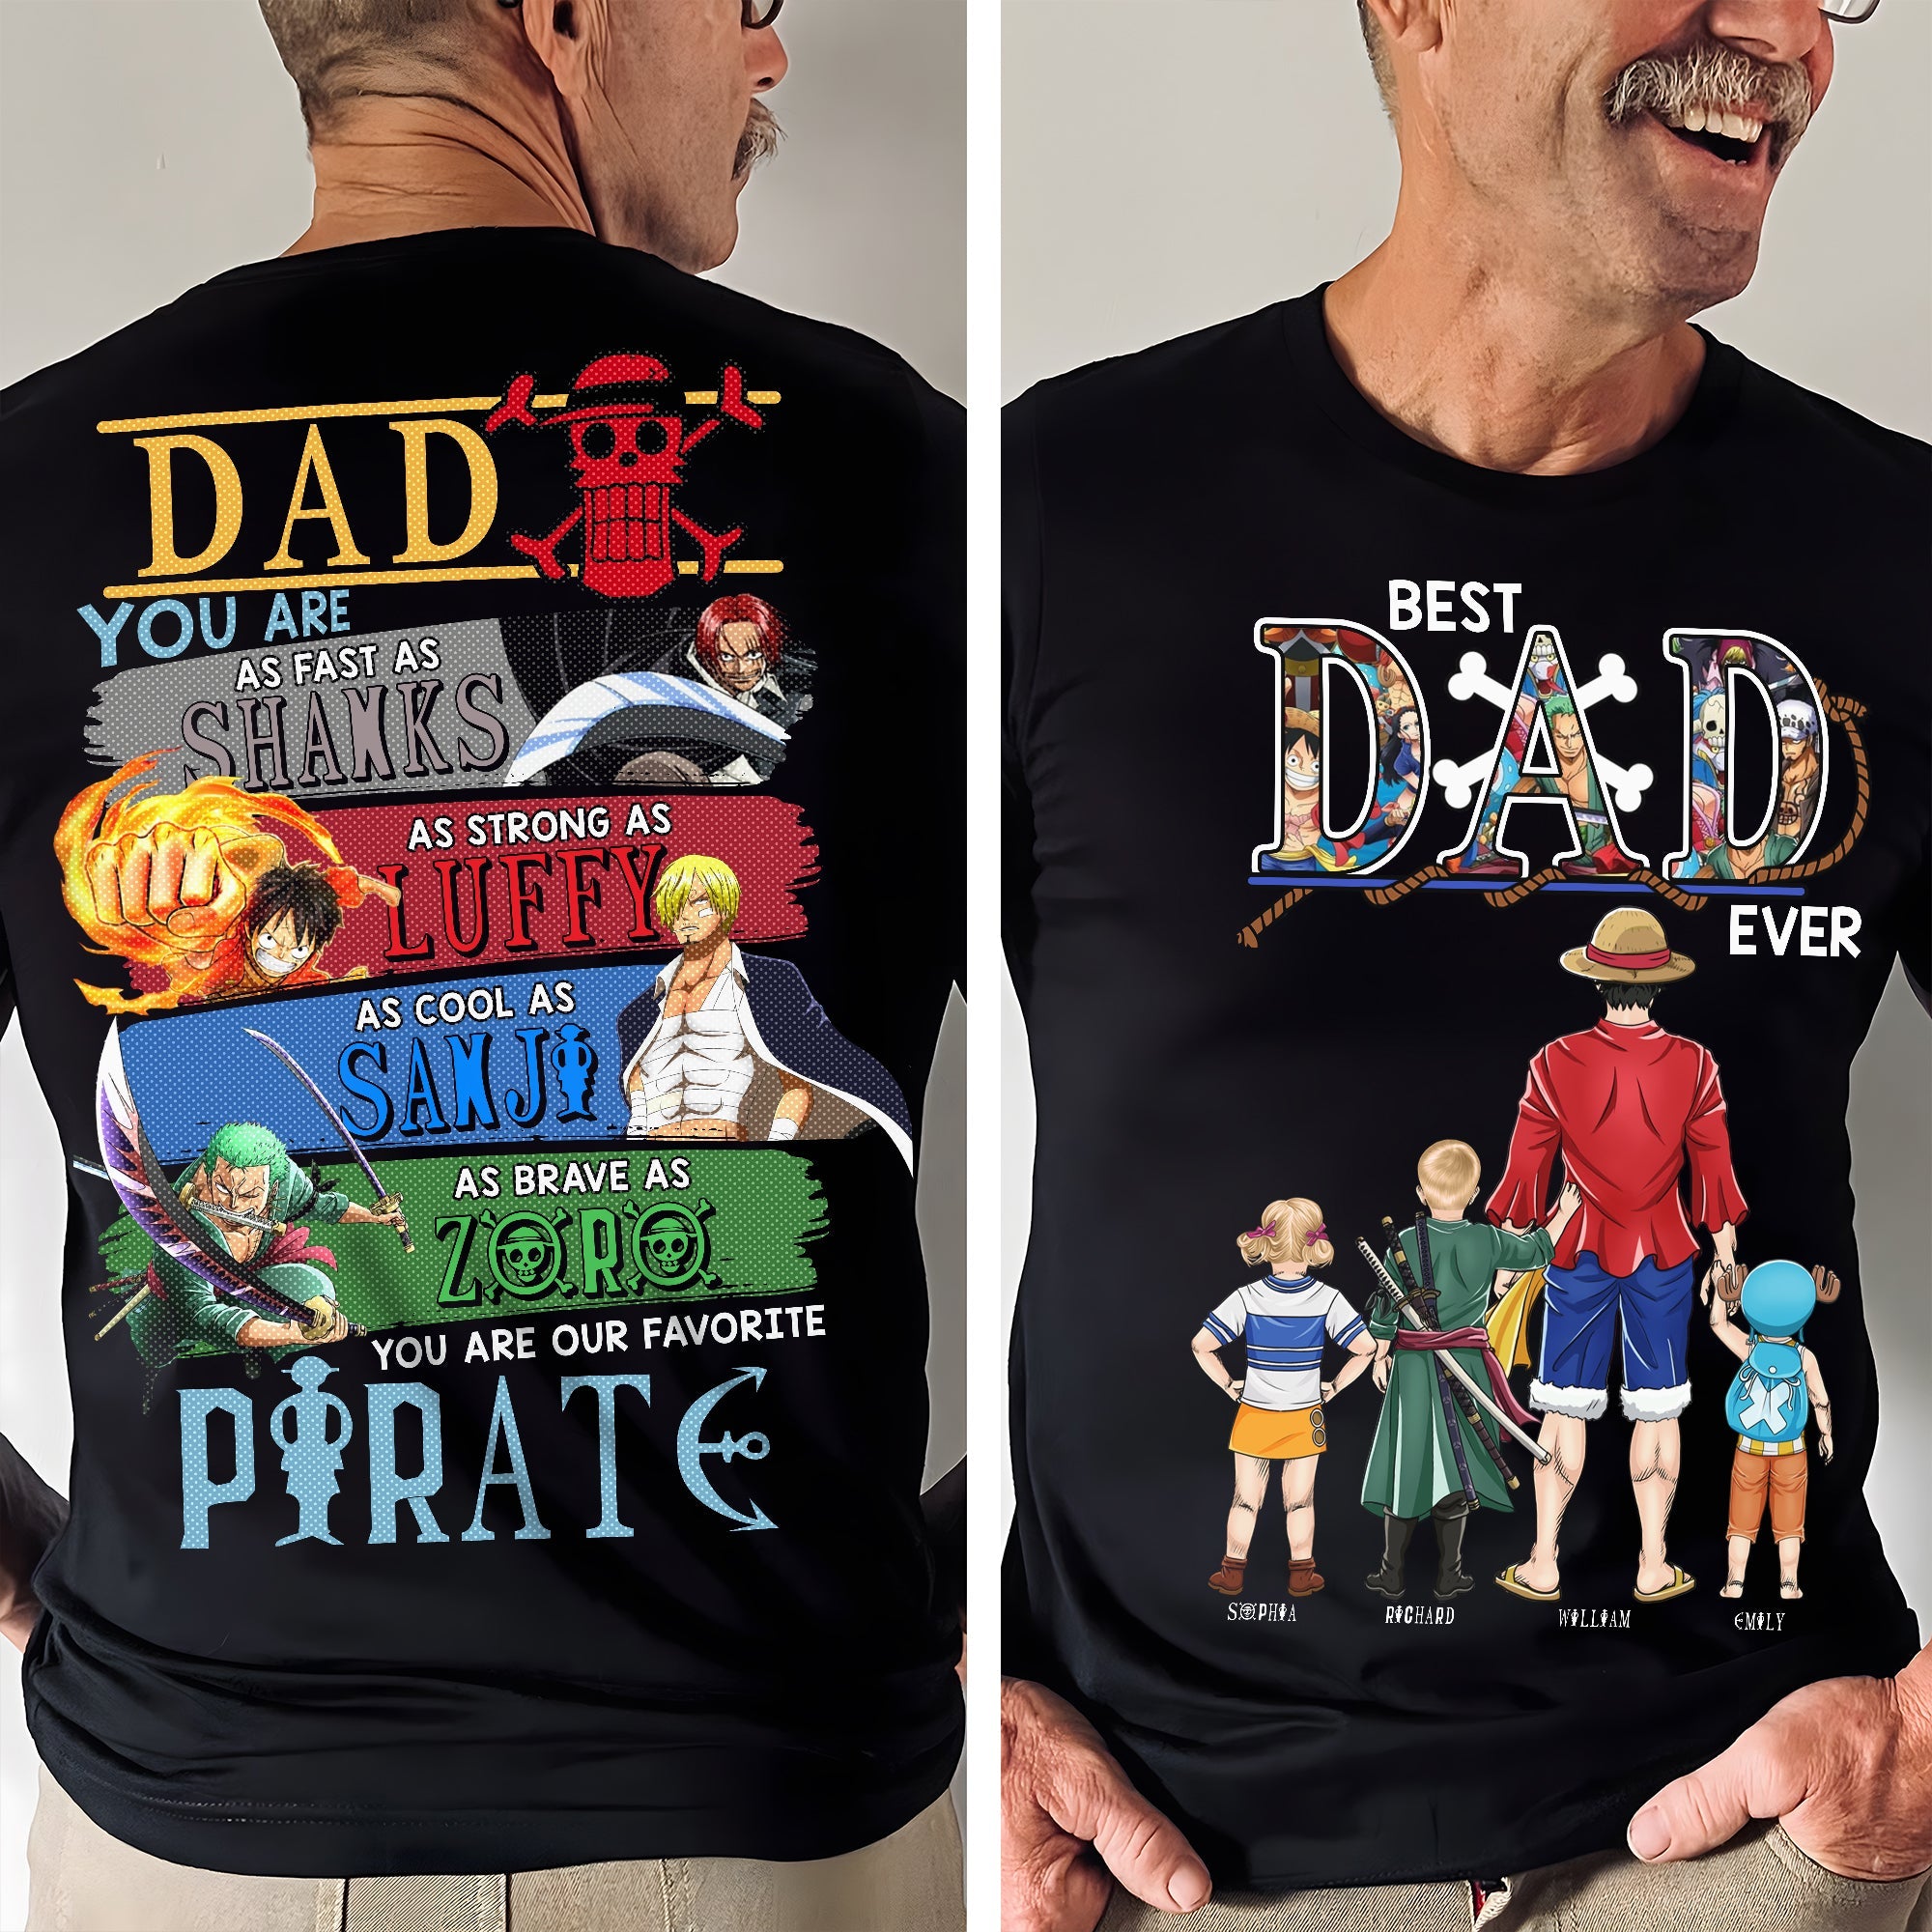 Personalized Gifts For Dad Shirt 03qhqn280524pa-Homacus